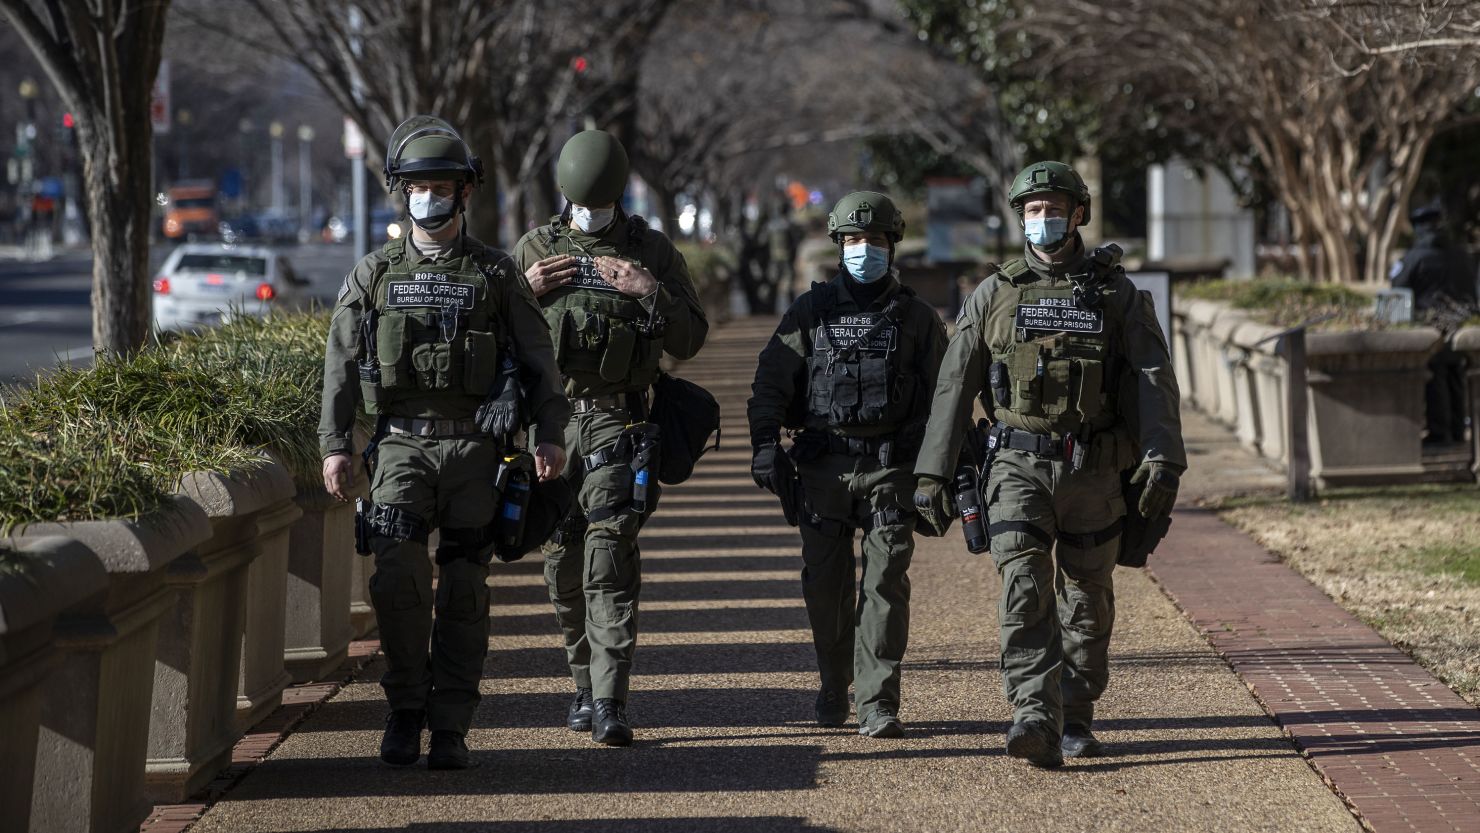 Federal law enforcement officers patrol the streets of Washington on January 7, 2021, the day after the US Capitol riot.